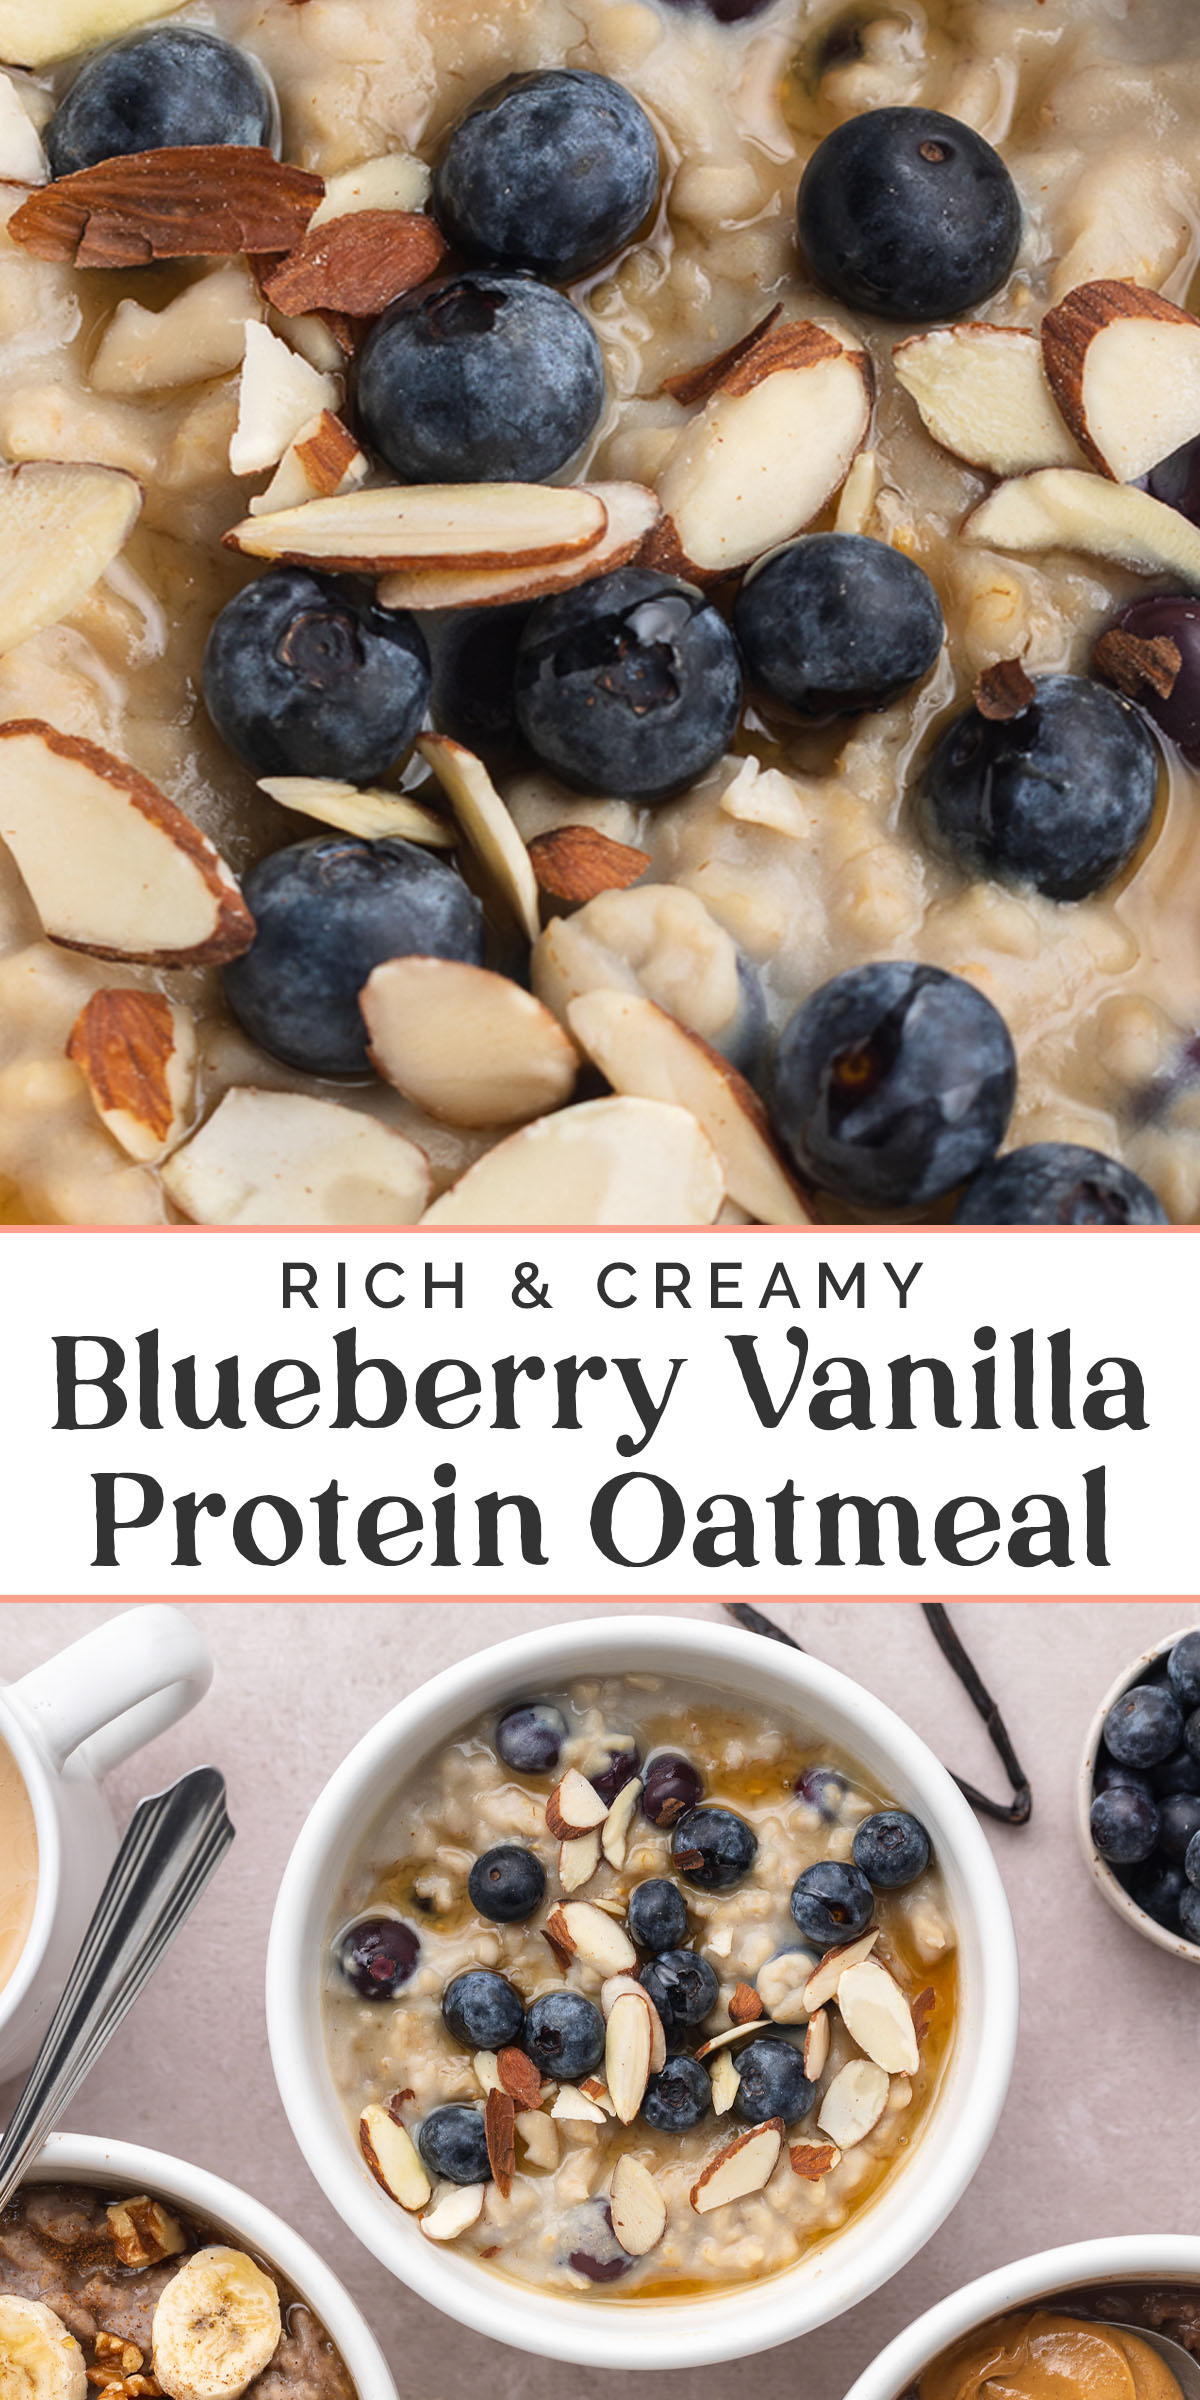 Pin graphic for protein oatmeal.